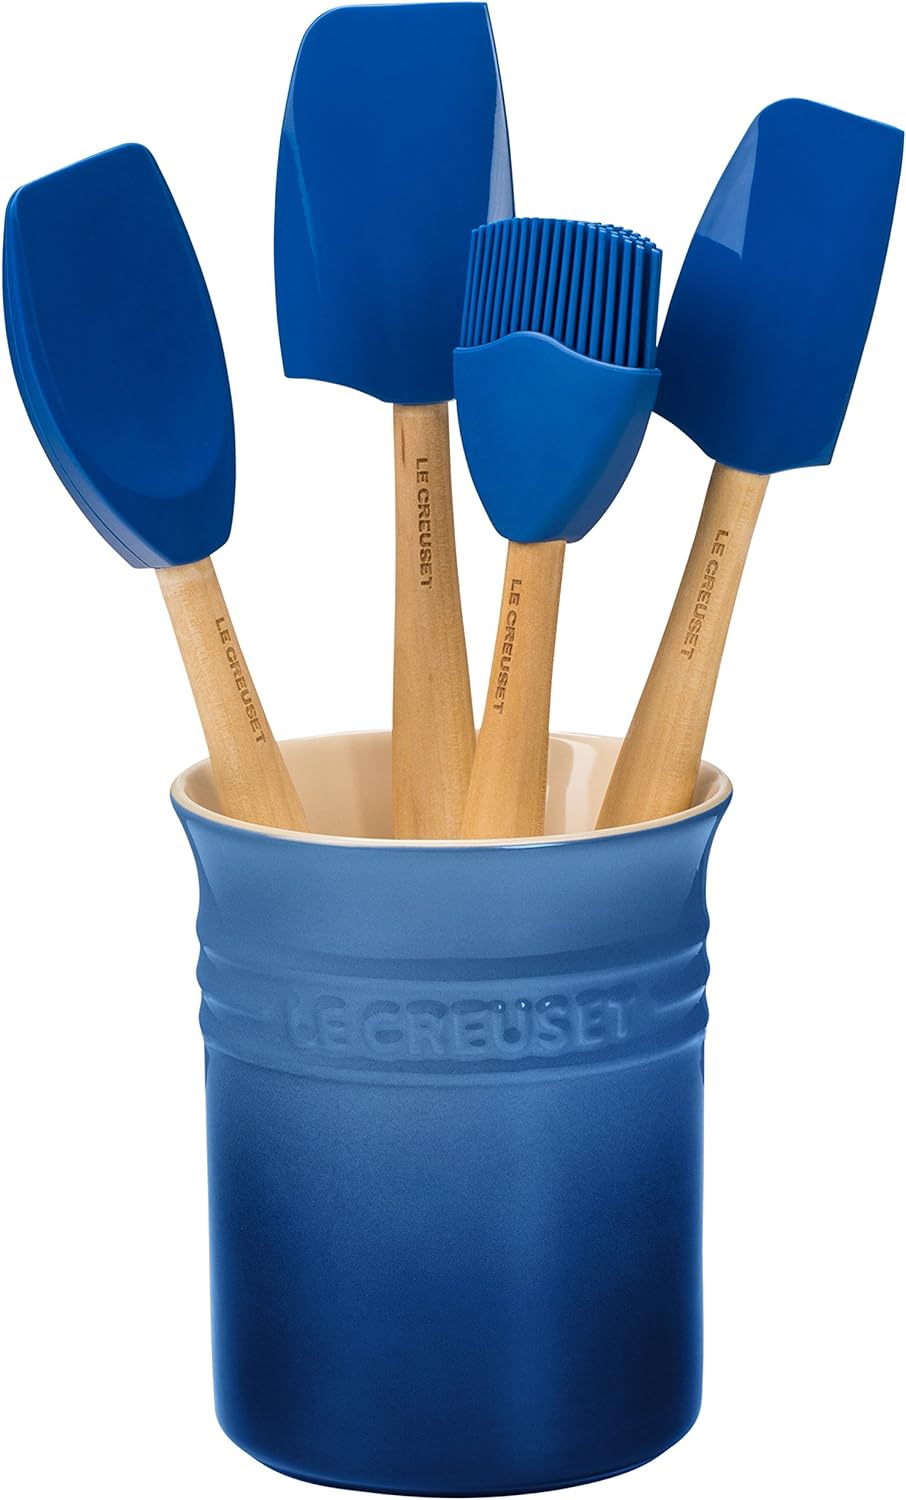 Le Creuset Silicone Craft Series Utensil Set with Stoneware Crock, 5 pc., Marseille